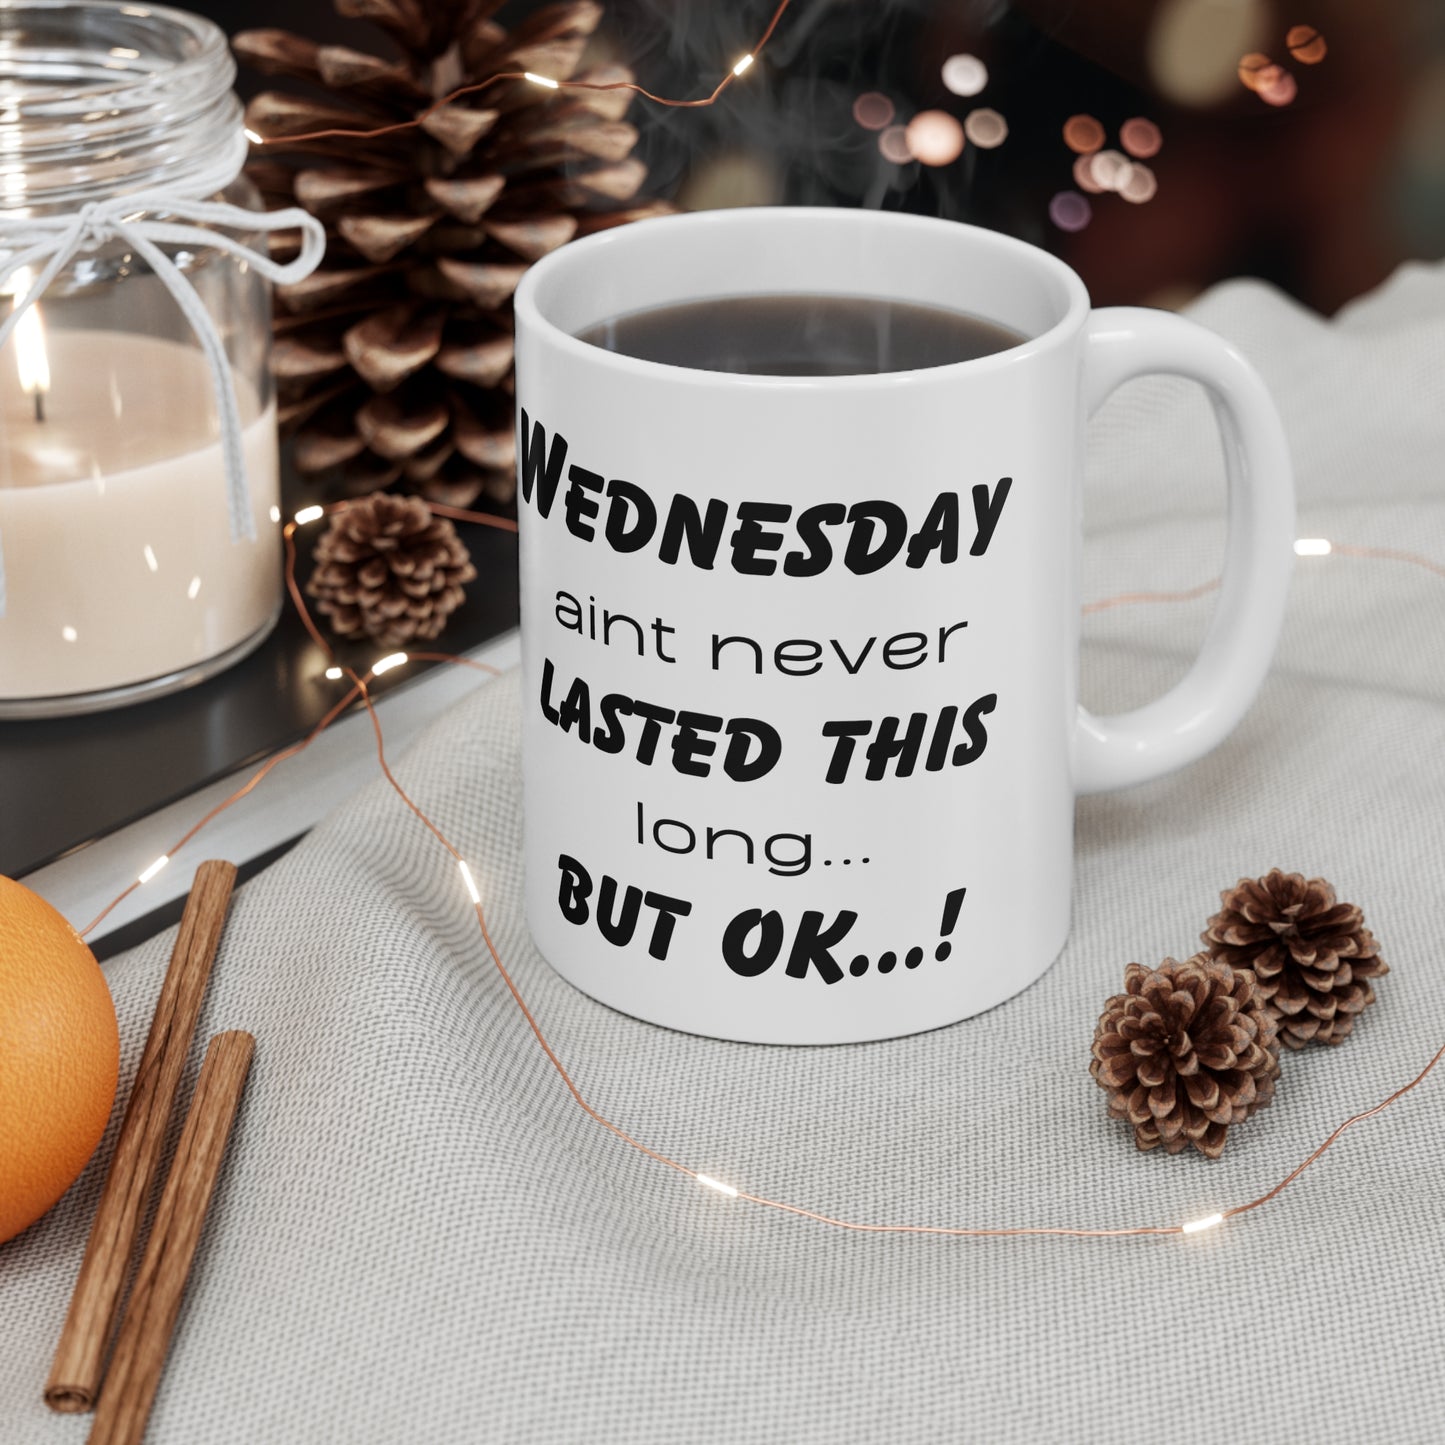 Wednesday ain't never this long ...but ok! Ceramic Coffee Cups, 11oz, 15oz